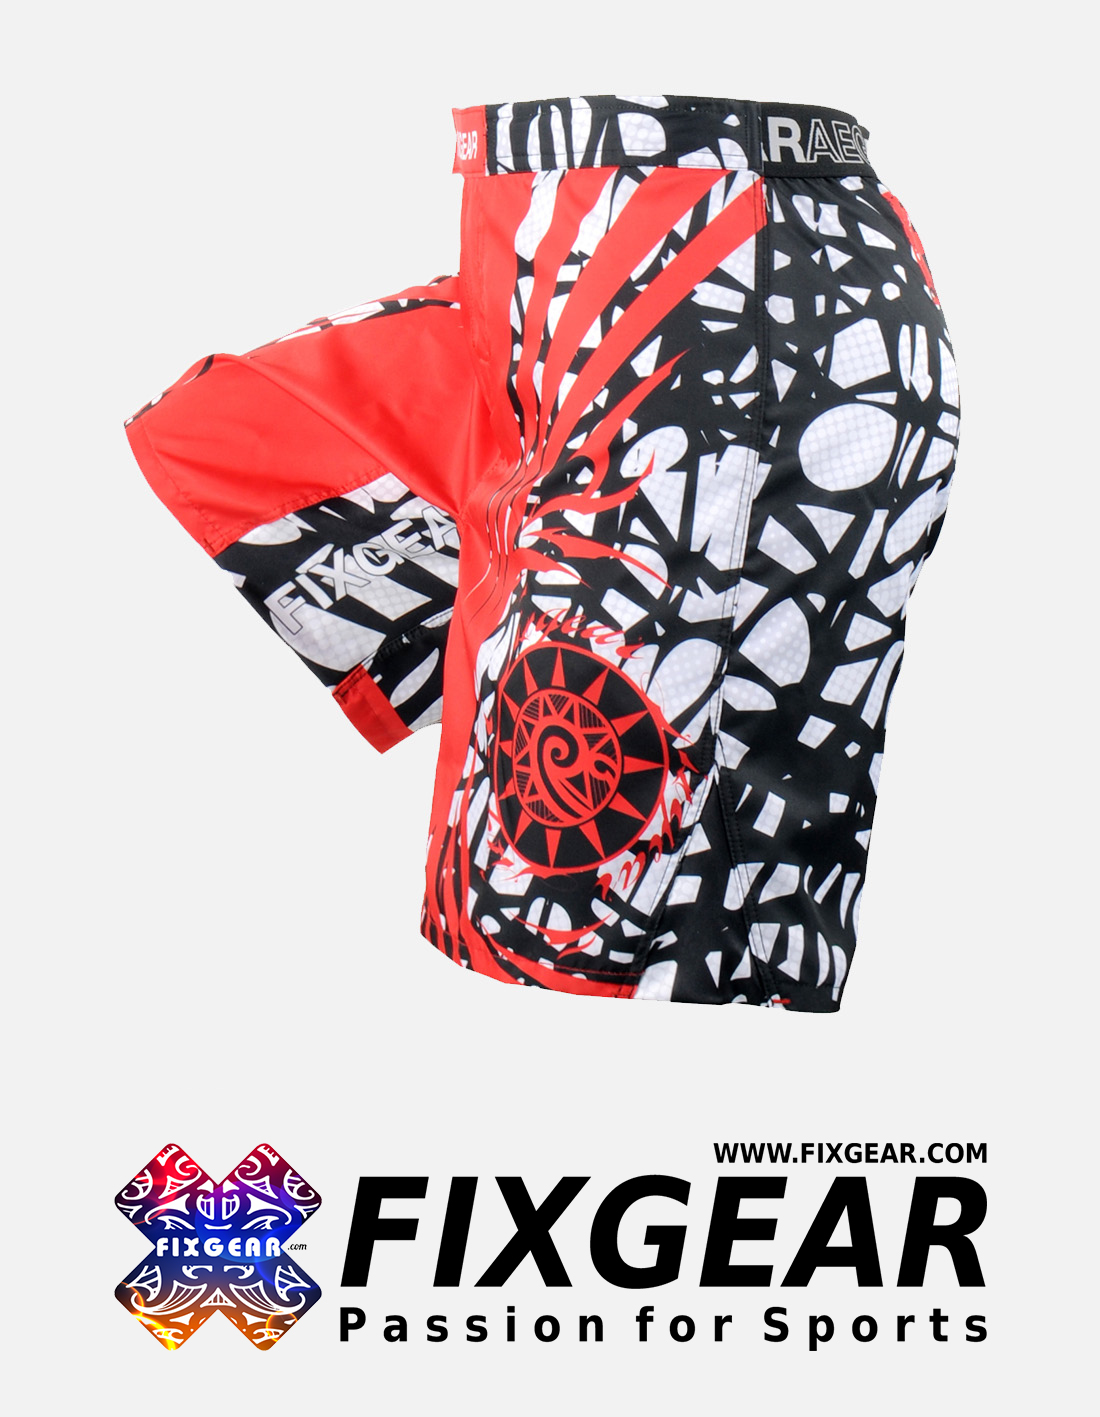 FIXGEAR FMS-74 MMA Graphic Shorts for Men Workout Training Fitness